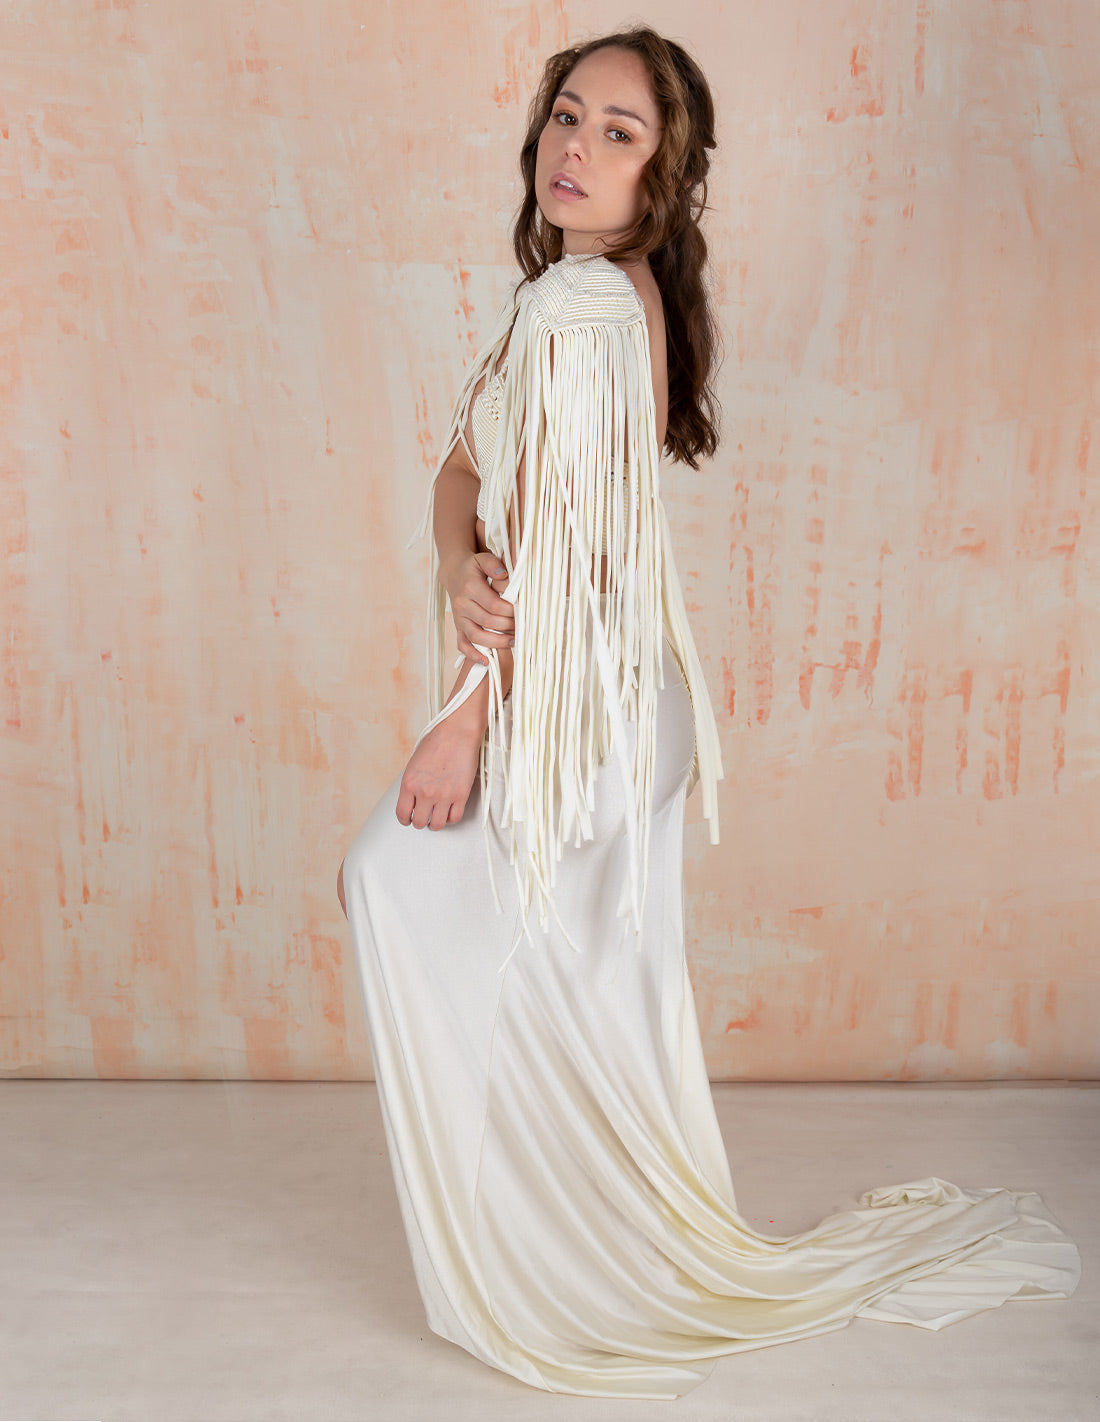 Luna Glow Shoulder Pads Ivory. Shoulder Pads With Hand Woven Macramé In Ivory. Entreaguas